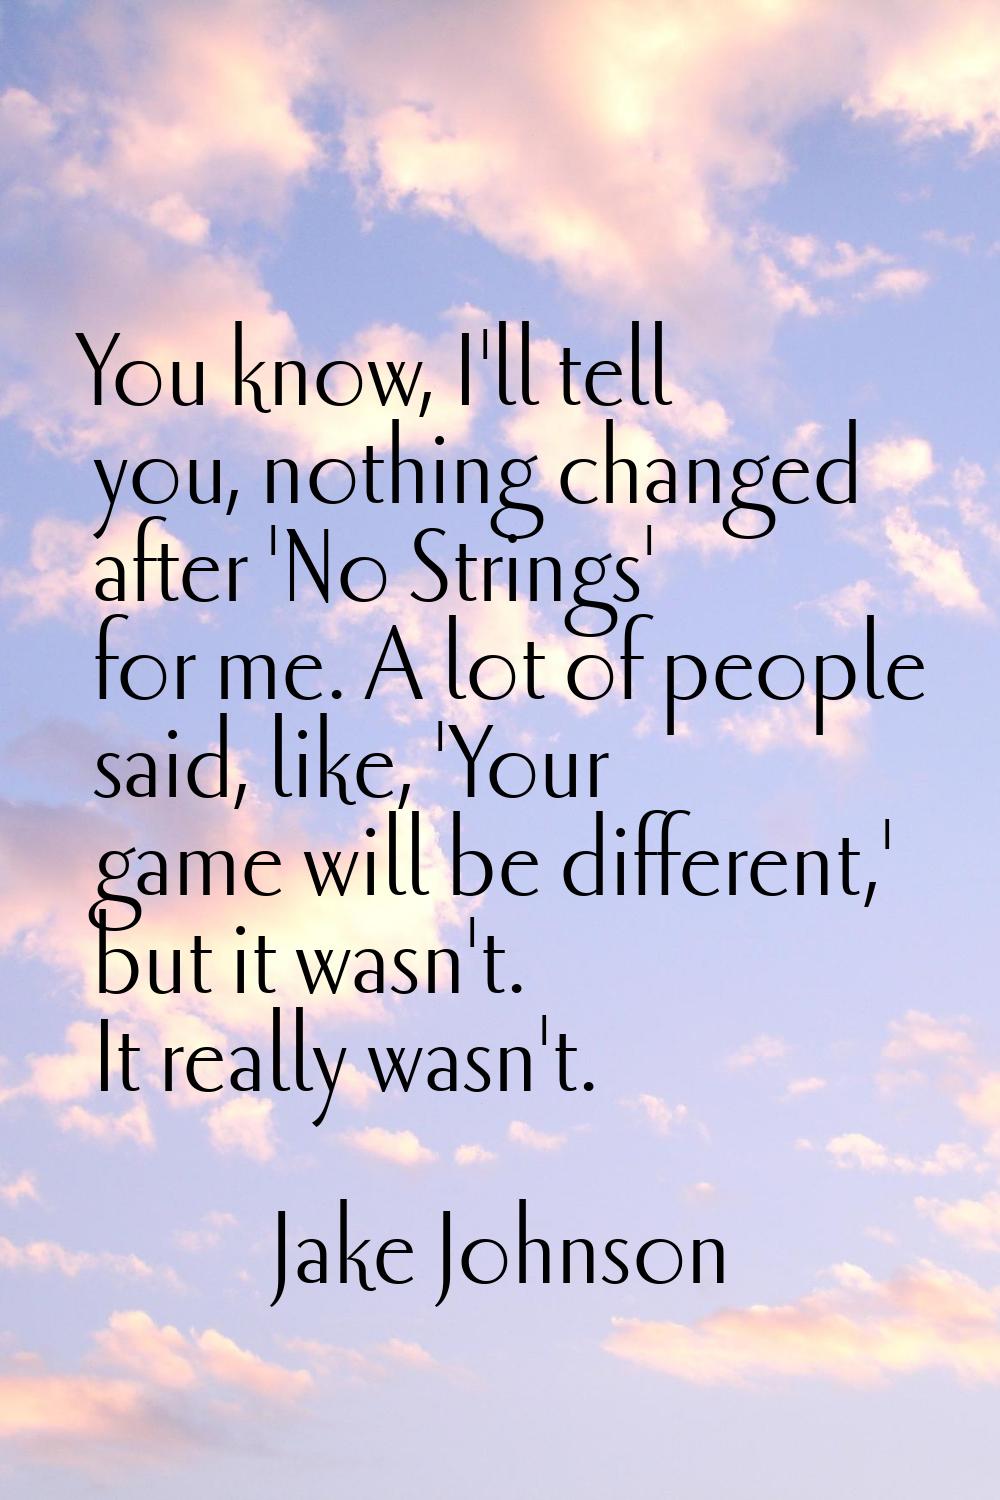 You know, I'll tell you, nothing changed after 'No Strings' for me. A lot of people said, like, 'Yo